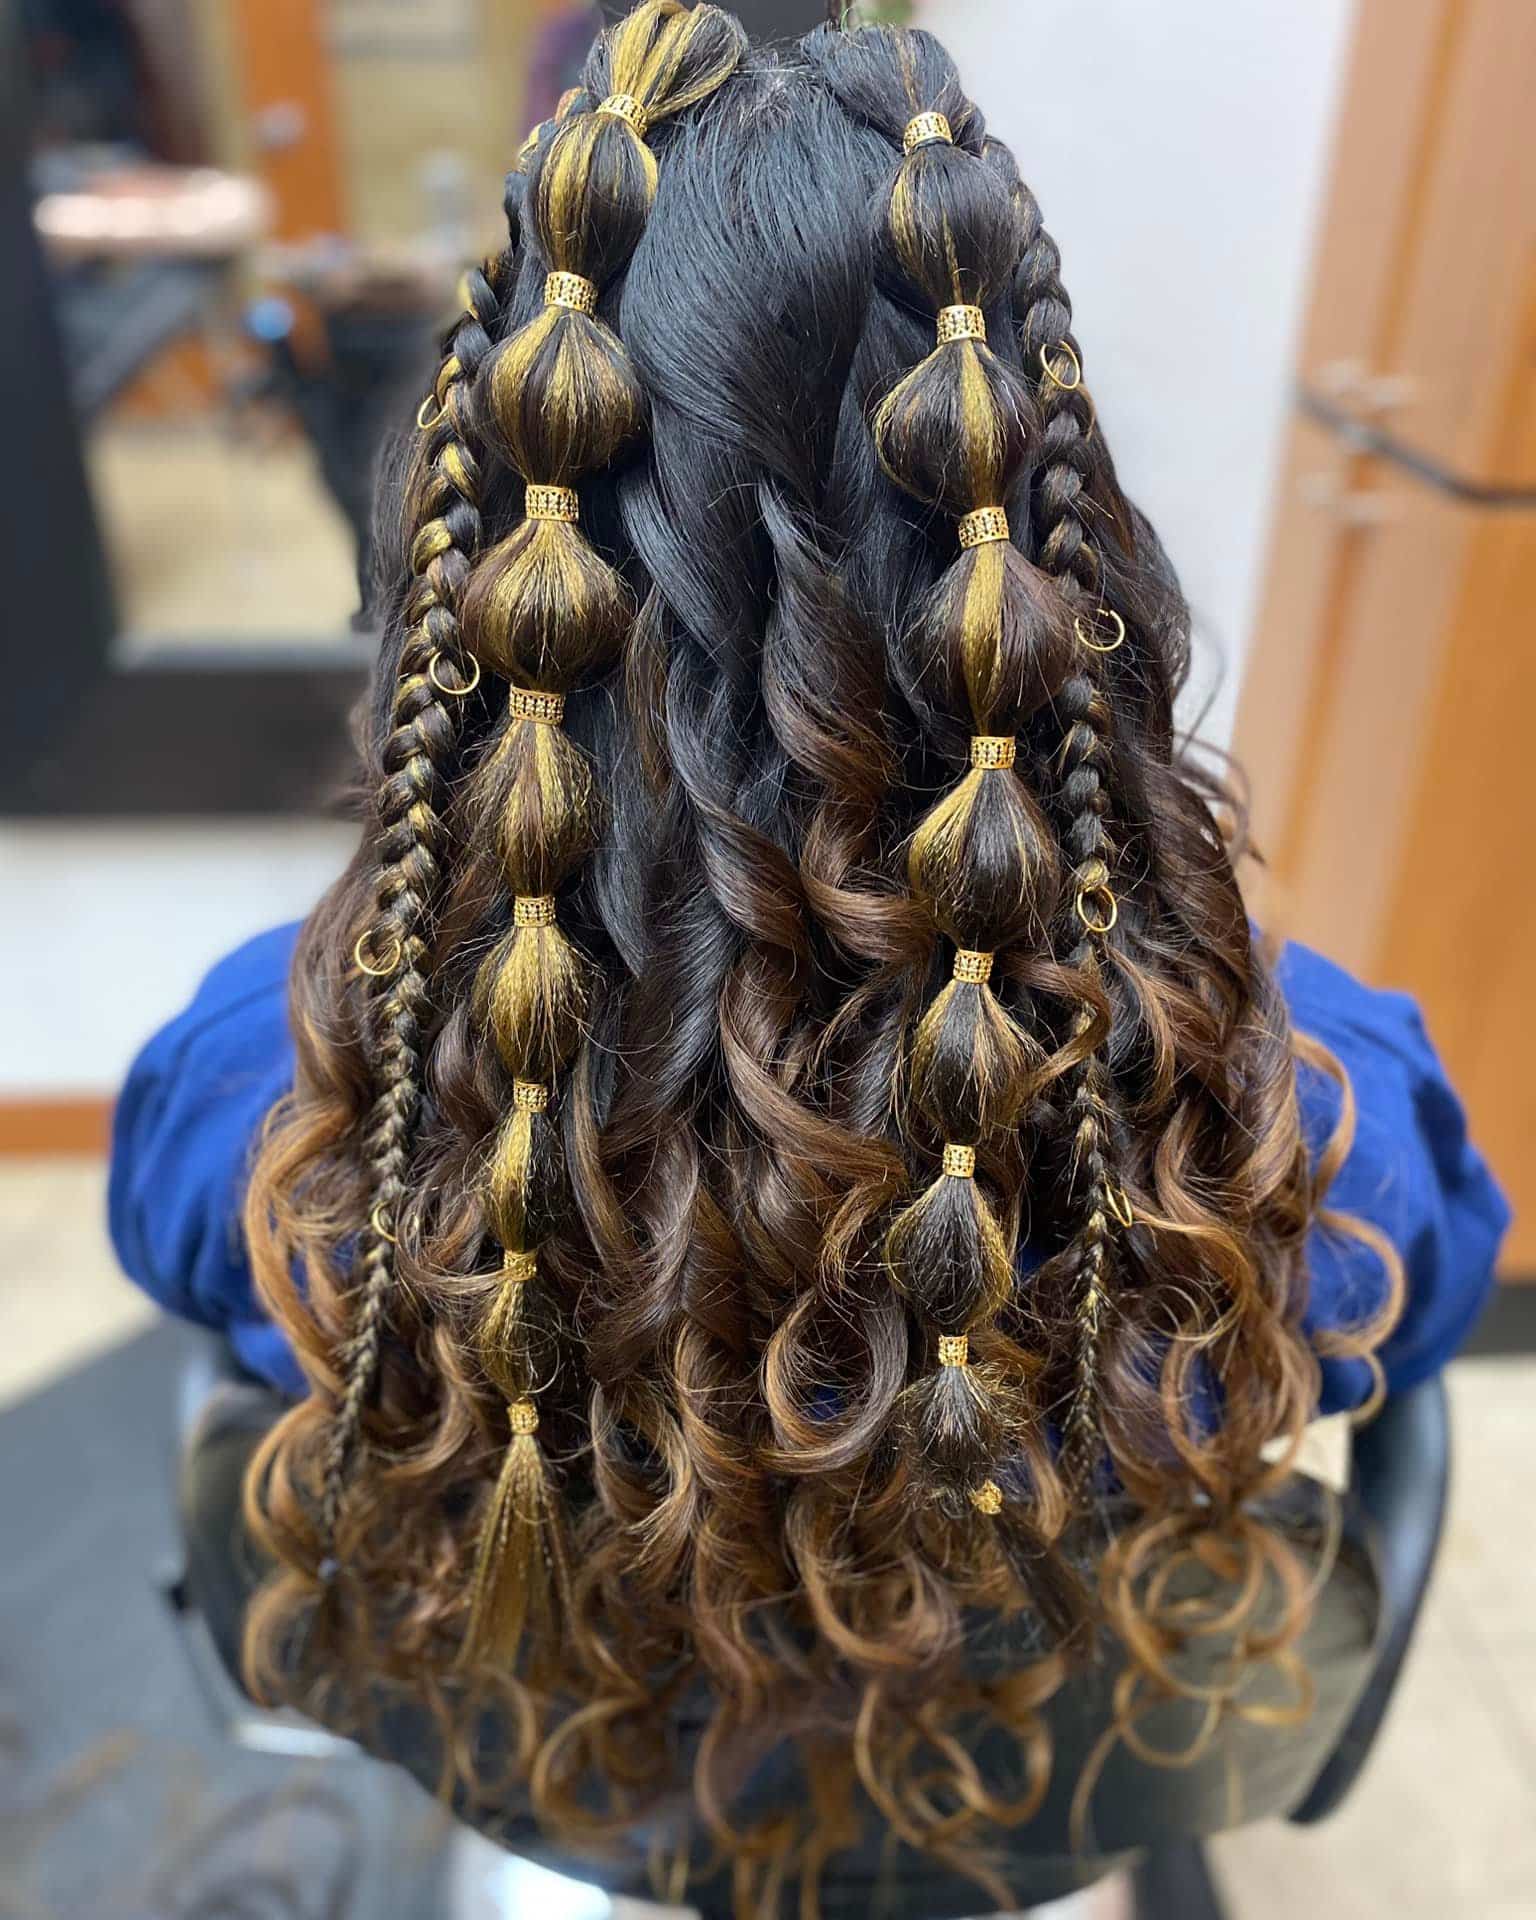 Image of Bubble Braids With Curls in the style of Braids With Curls